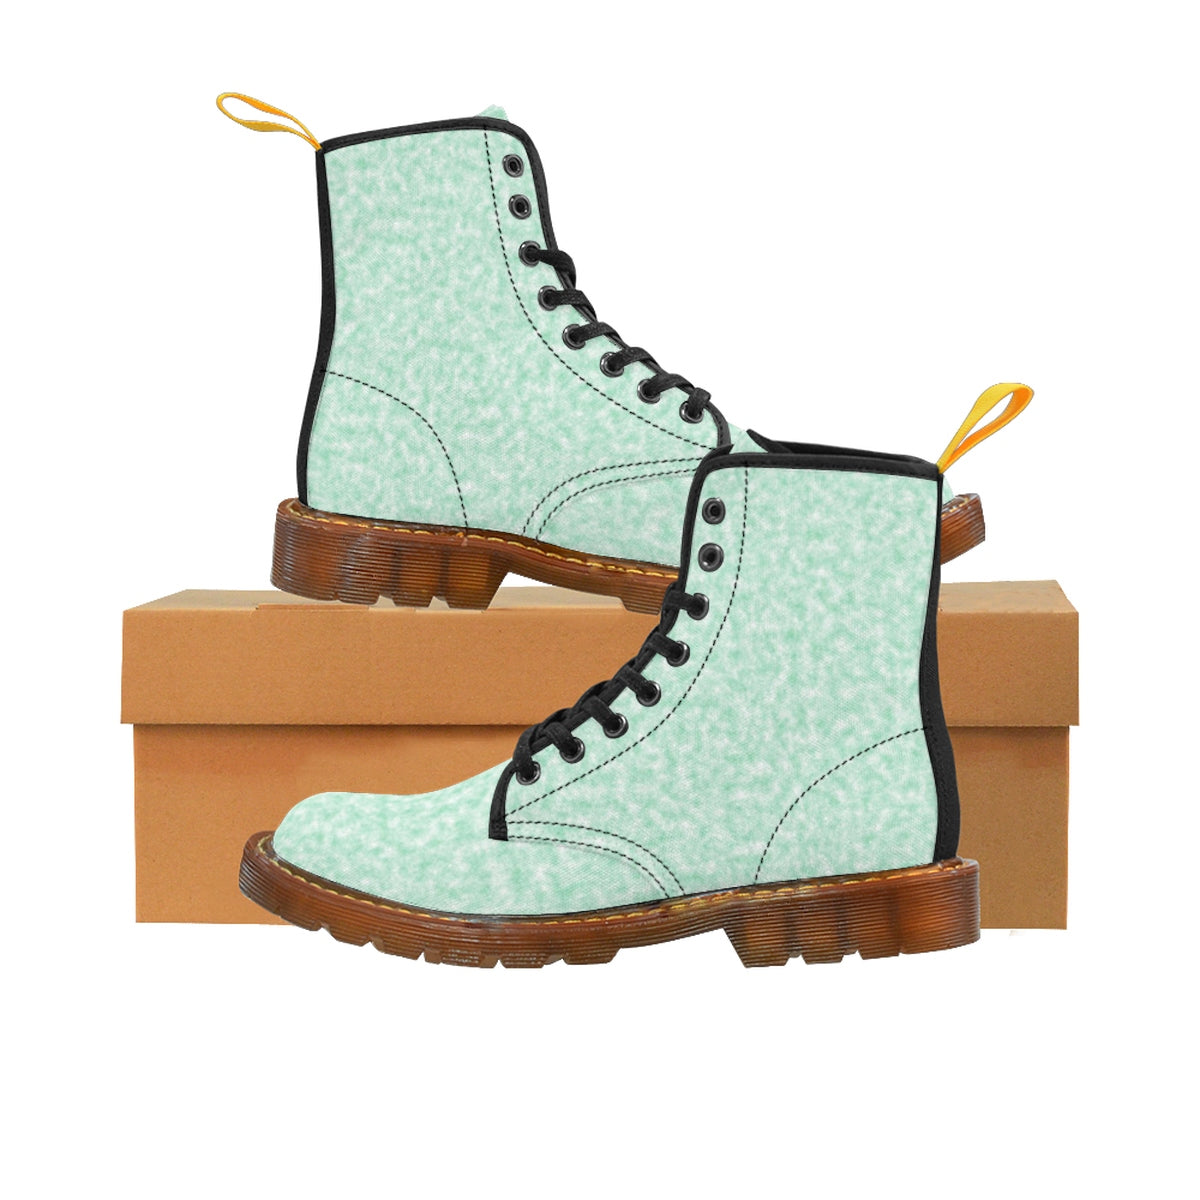 Seafoam Green and White Clouds Boots